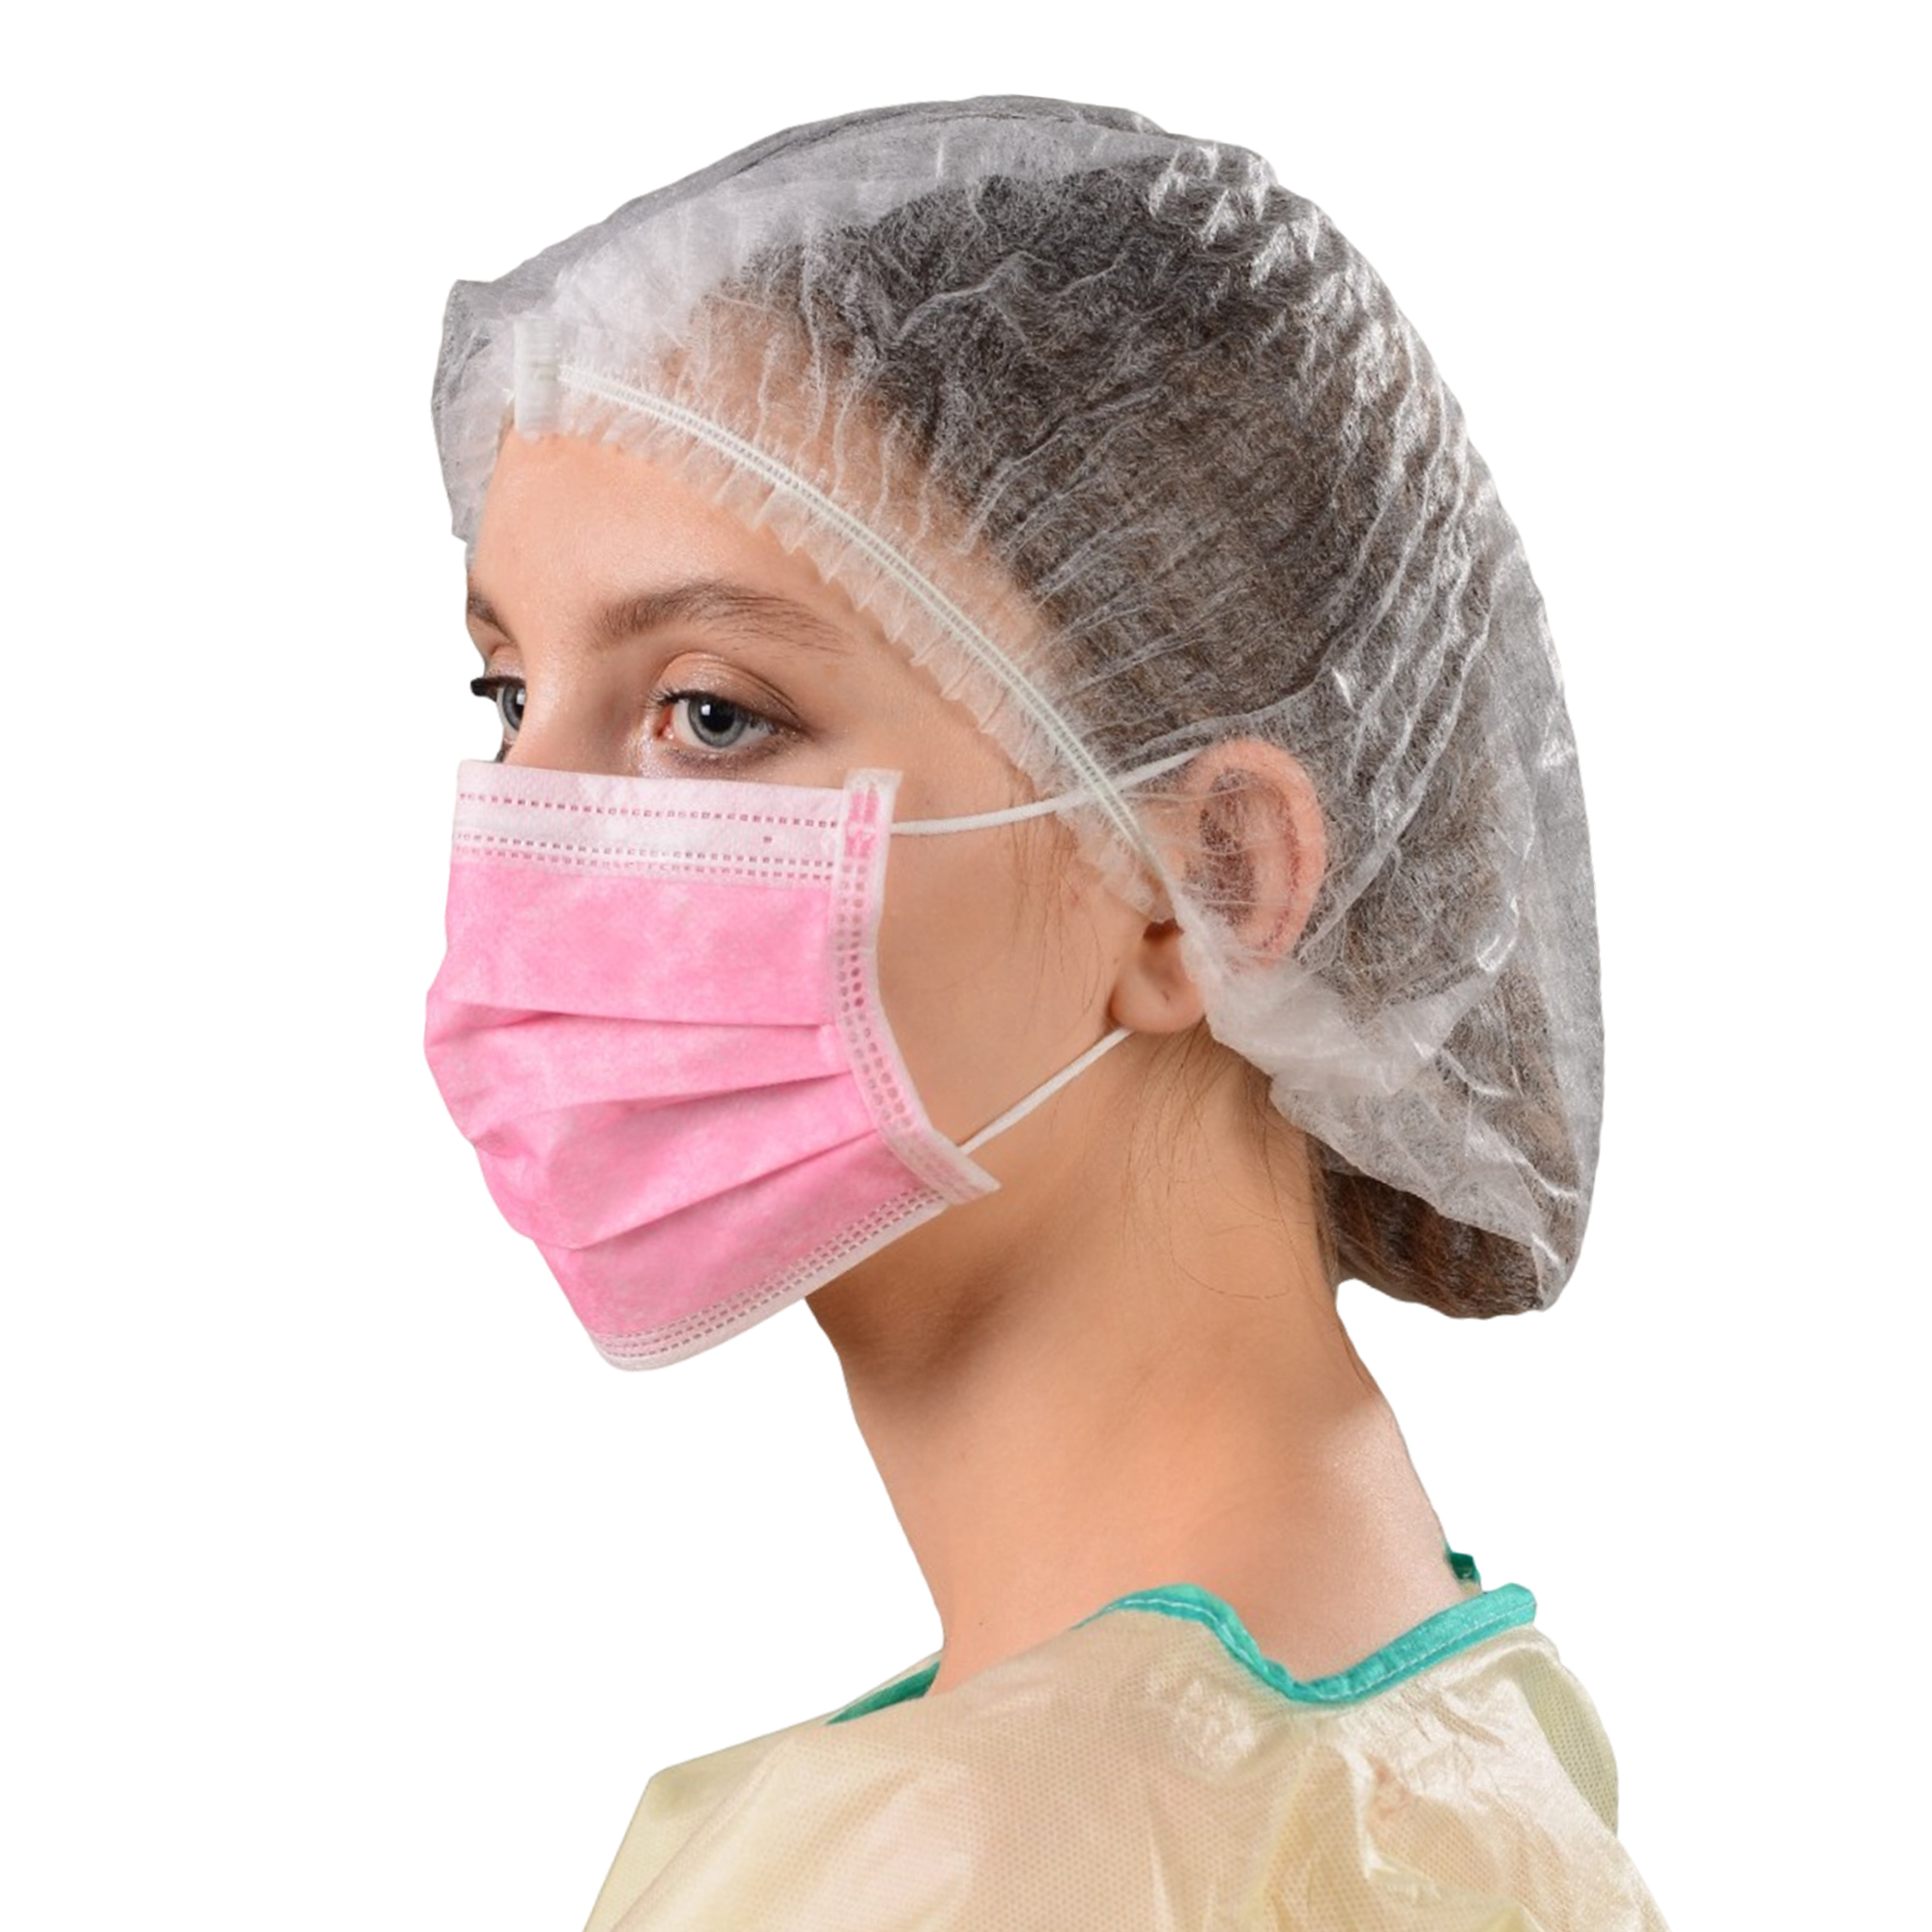 Surgical Mask Medical Face Mask Comfortable earloop face mask